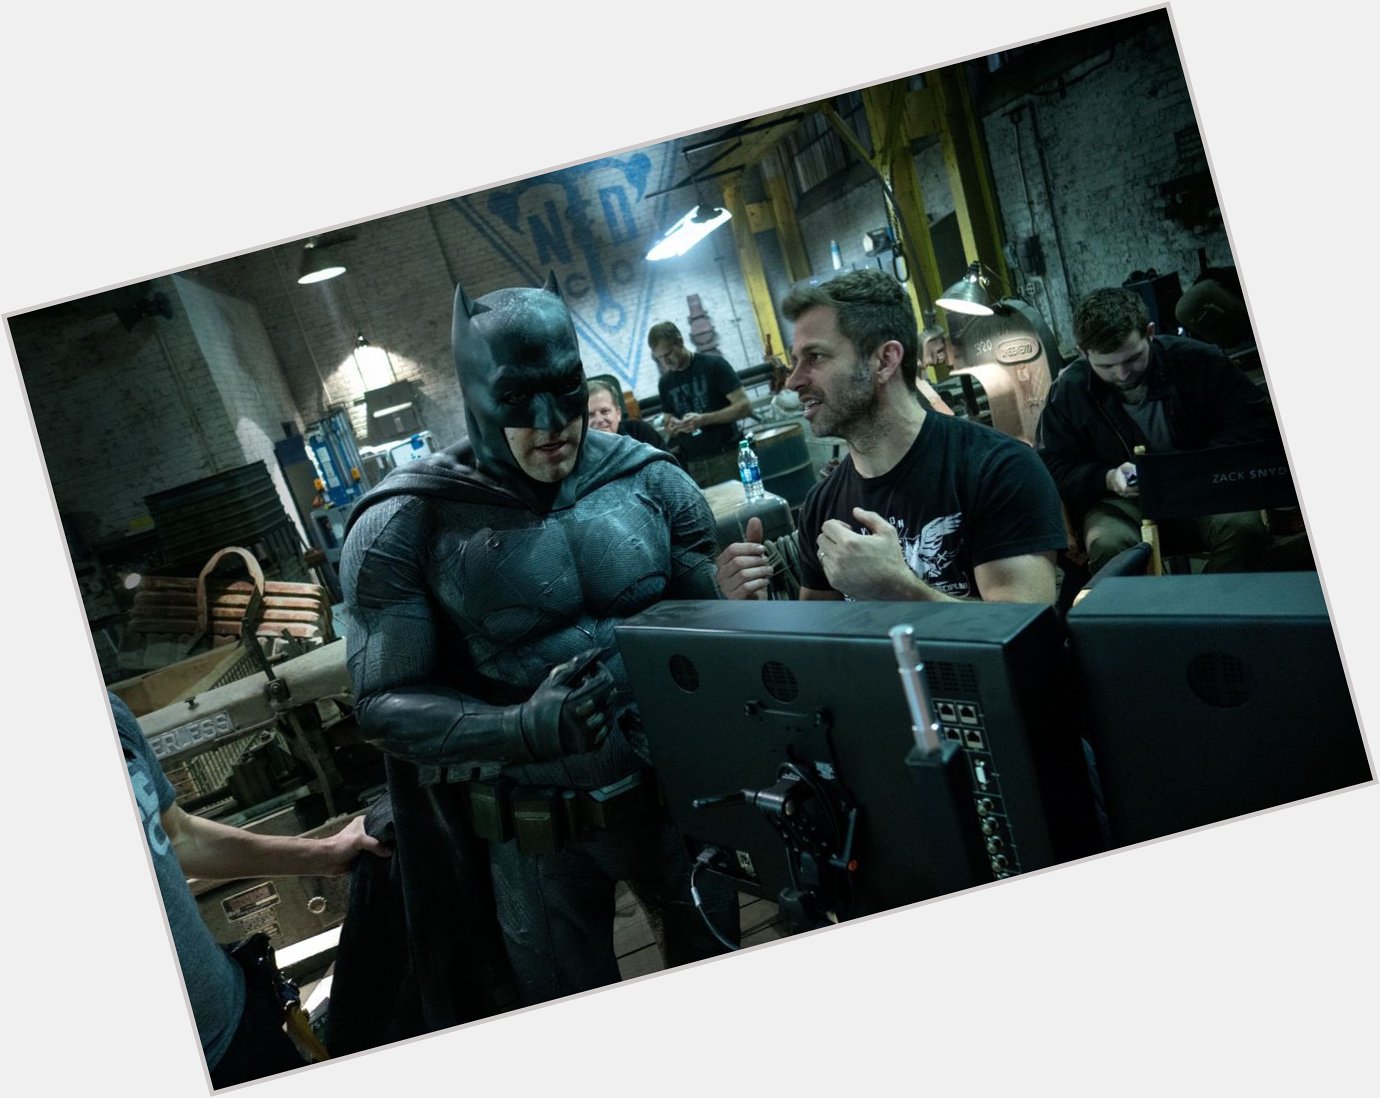 Happy Birthday to the legend that is
Zack Snyder. 